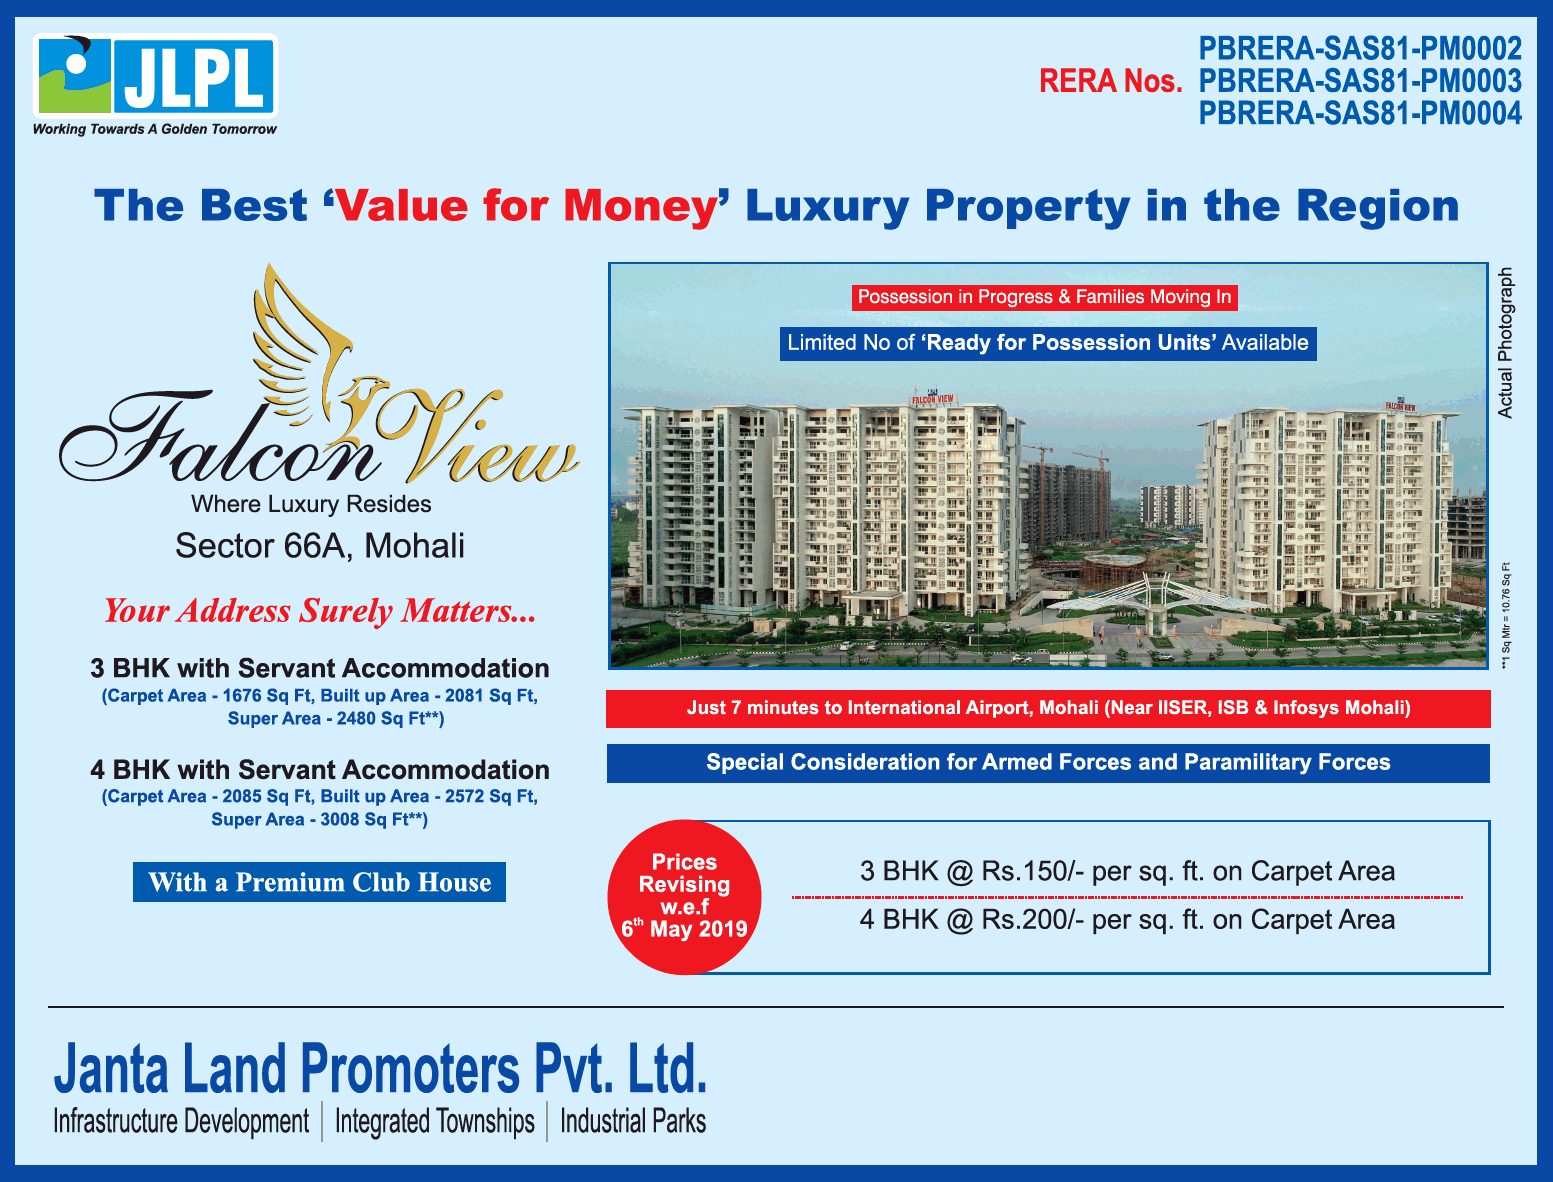 Limited no of ready for possession units are available at JLPL Falcon View in Mohali Update